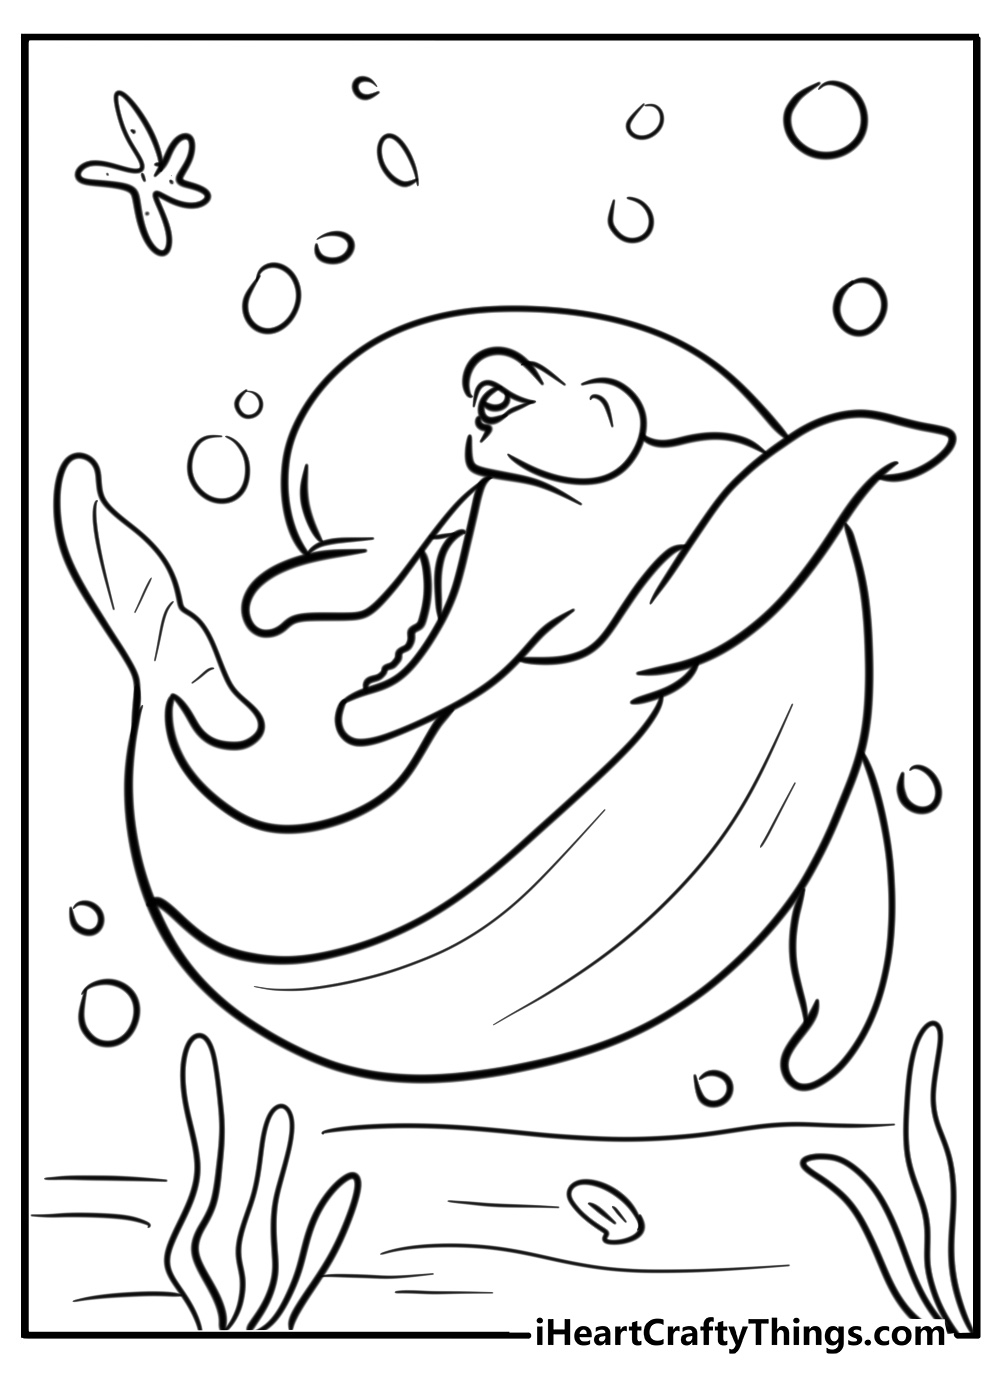 Shark coloring page of shark tale lenny